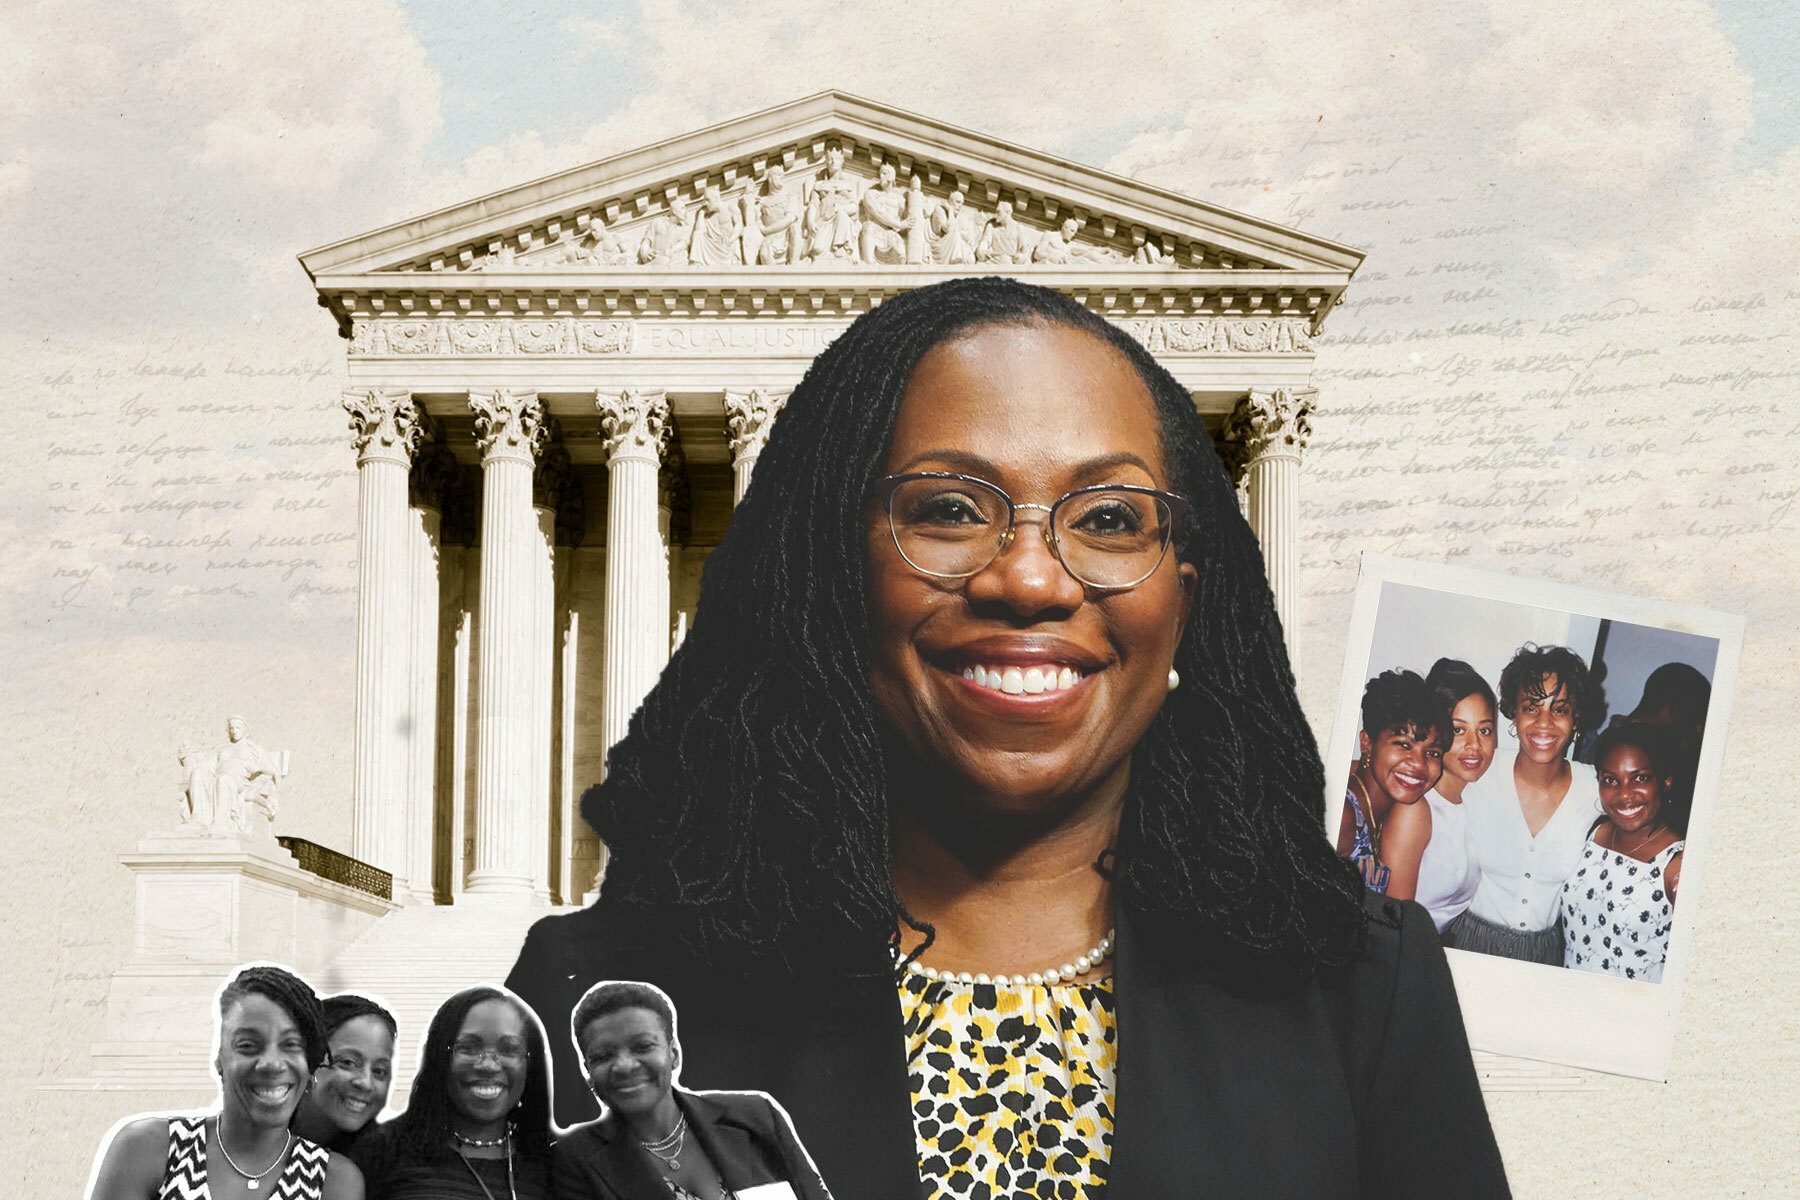 Photo collage of Ketanji Brown Jackson smiling, the U.S. Supreme Court building, and images of Jackson and her best friends through the years.